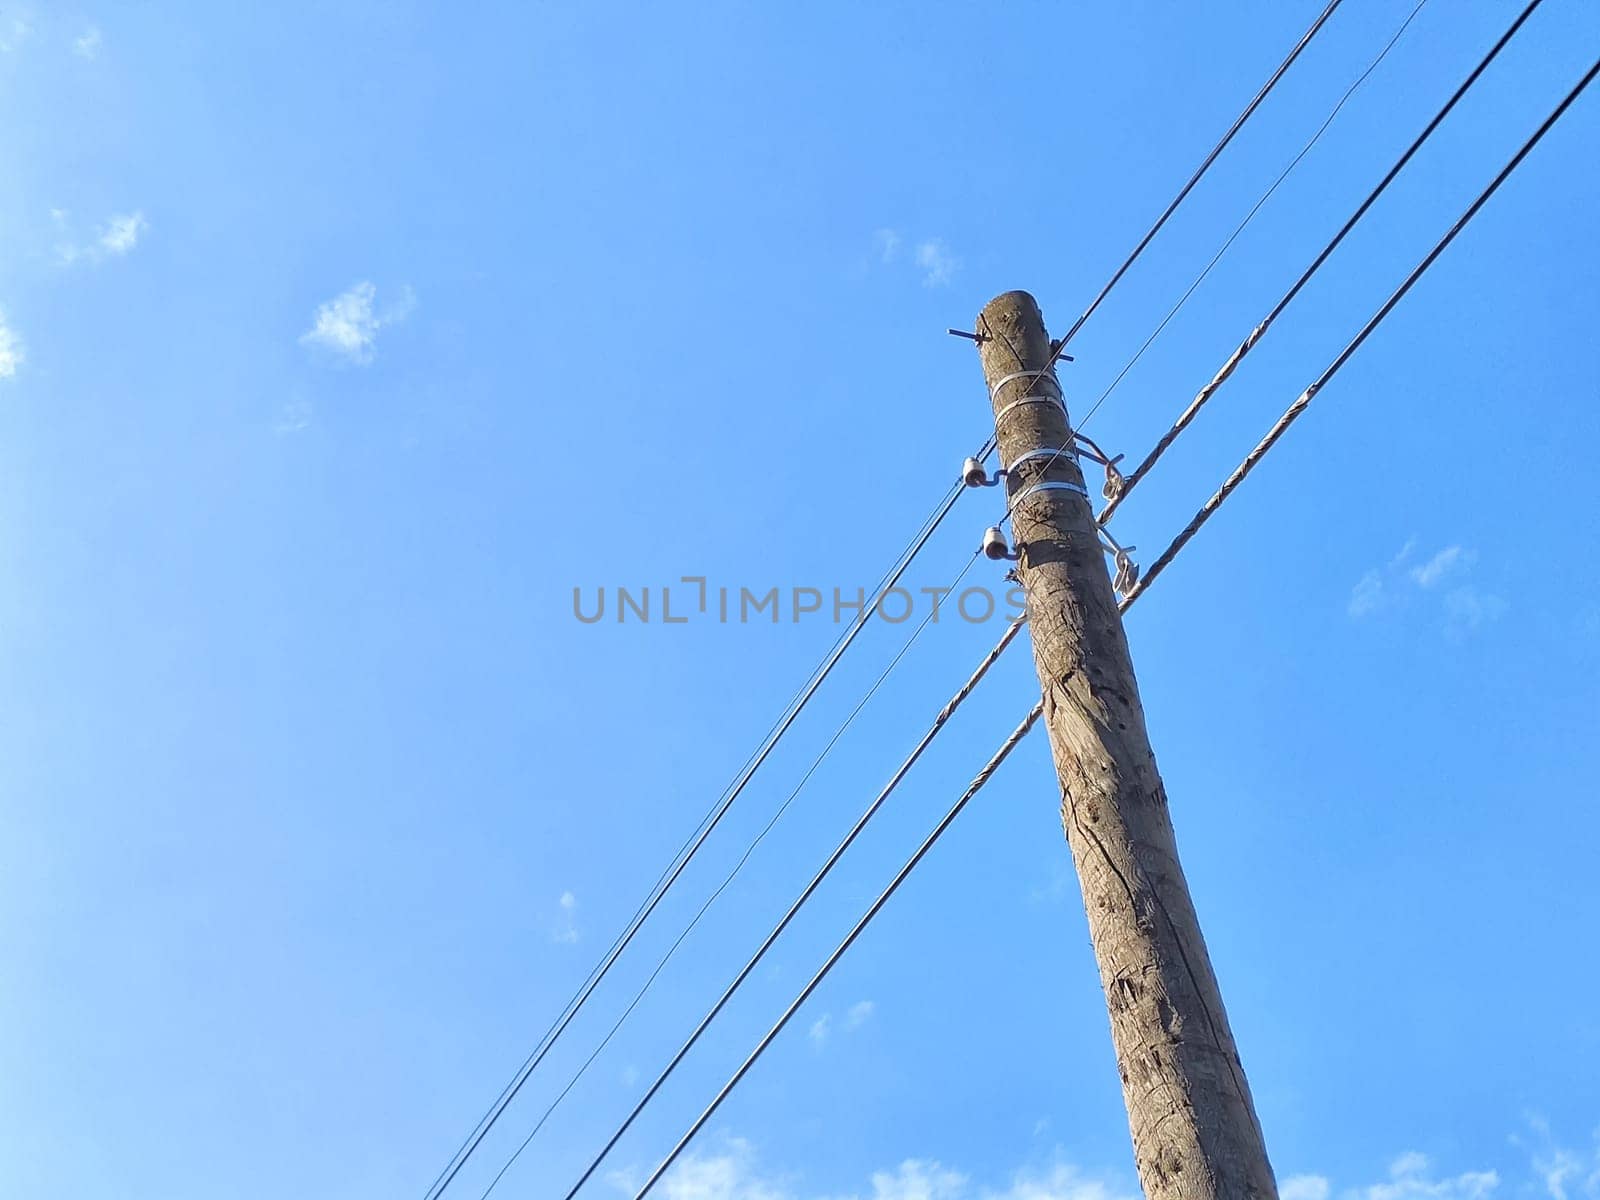 Old power line pole against blue sky in sunny day by keleny